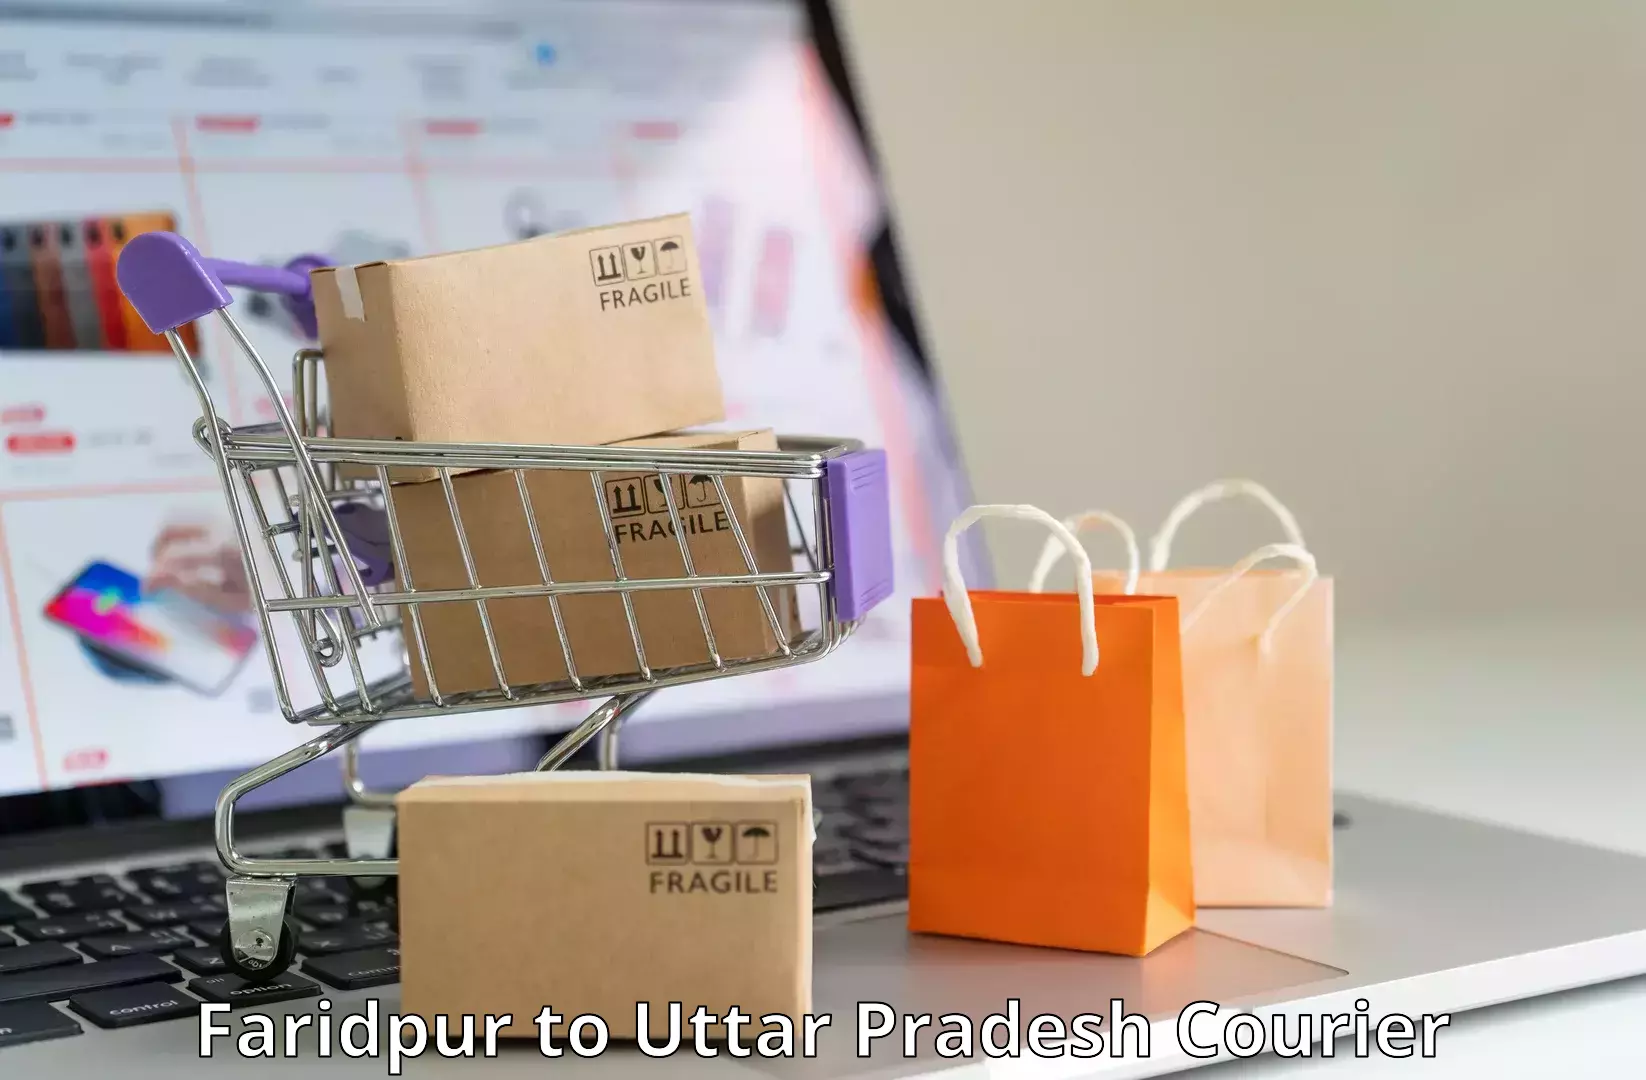 Easy access courier services in Faridpur to Poonchh